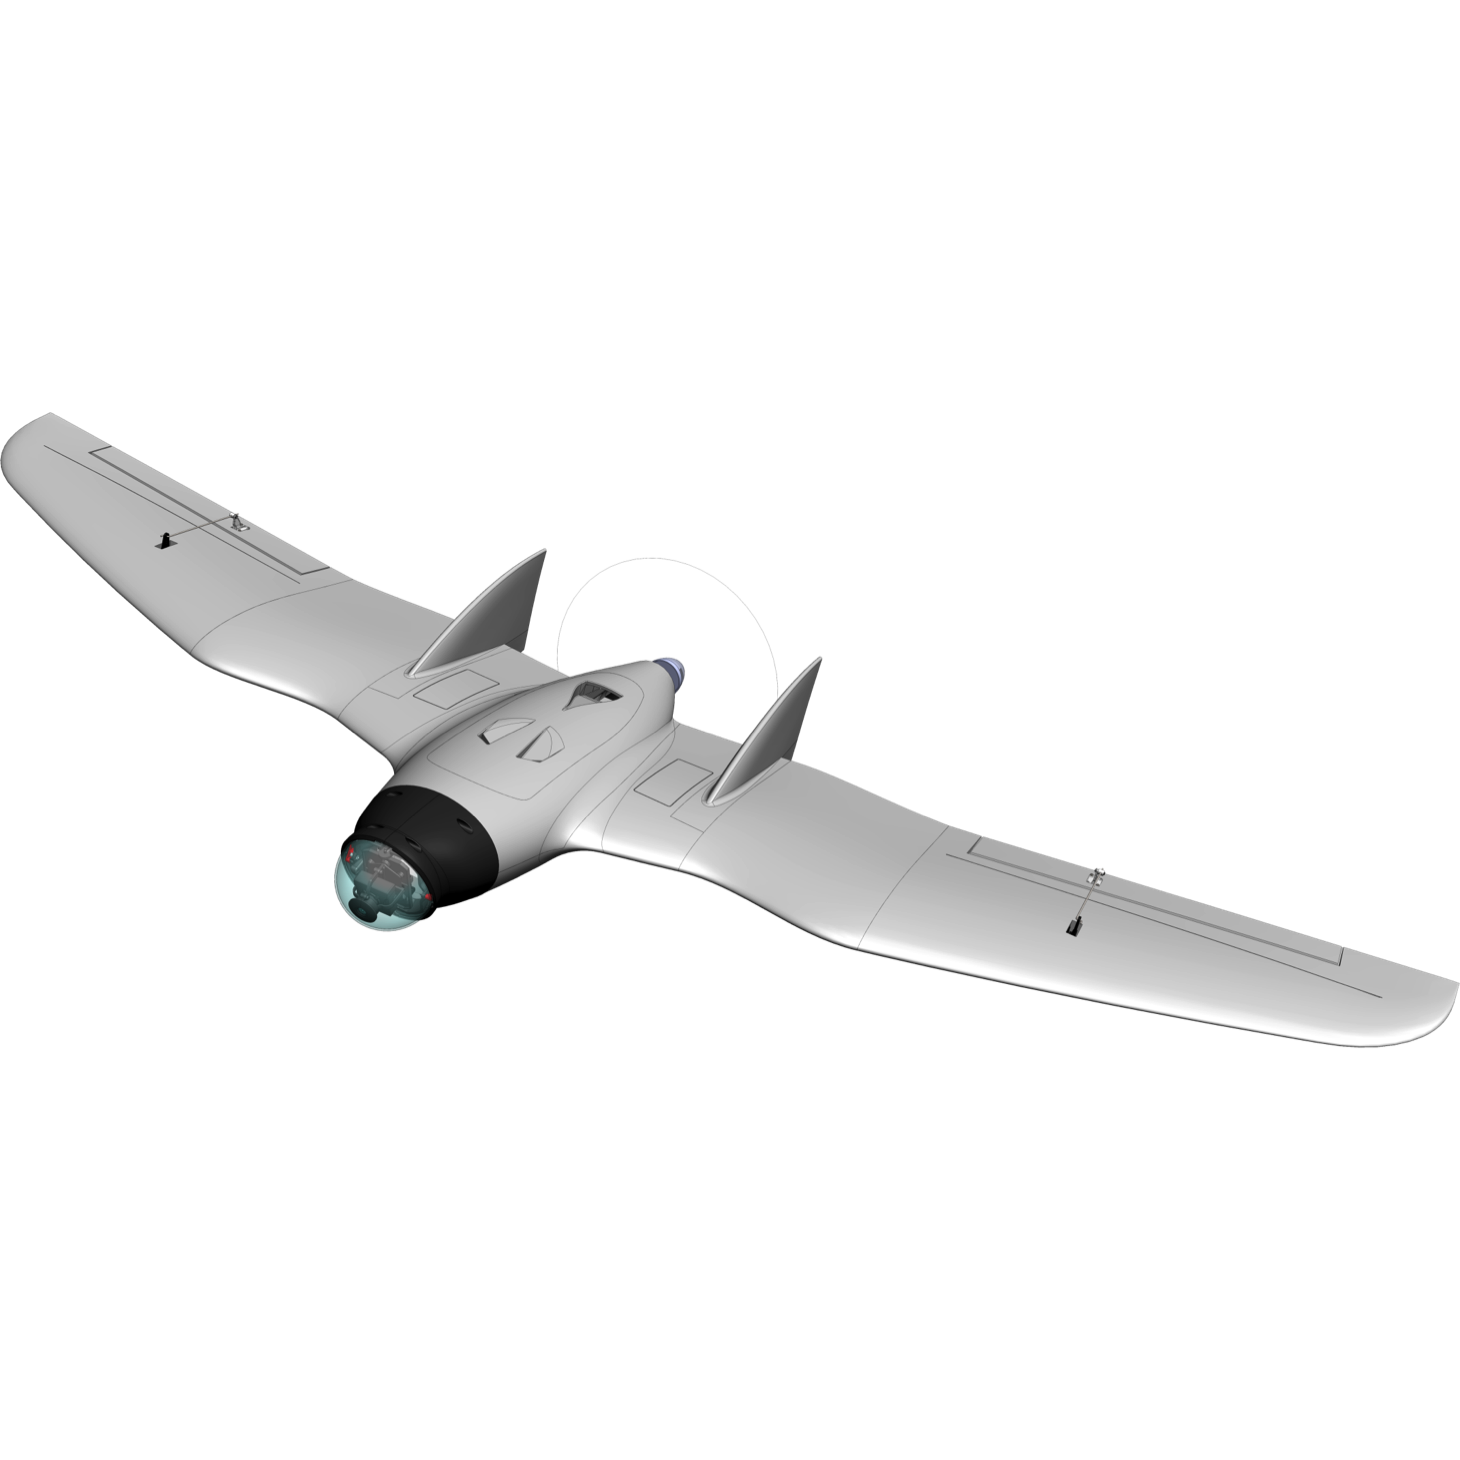 RVJET 1950 mm FPV Flying Wing Kit with Pan and Tilt Dome- EPP Black